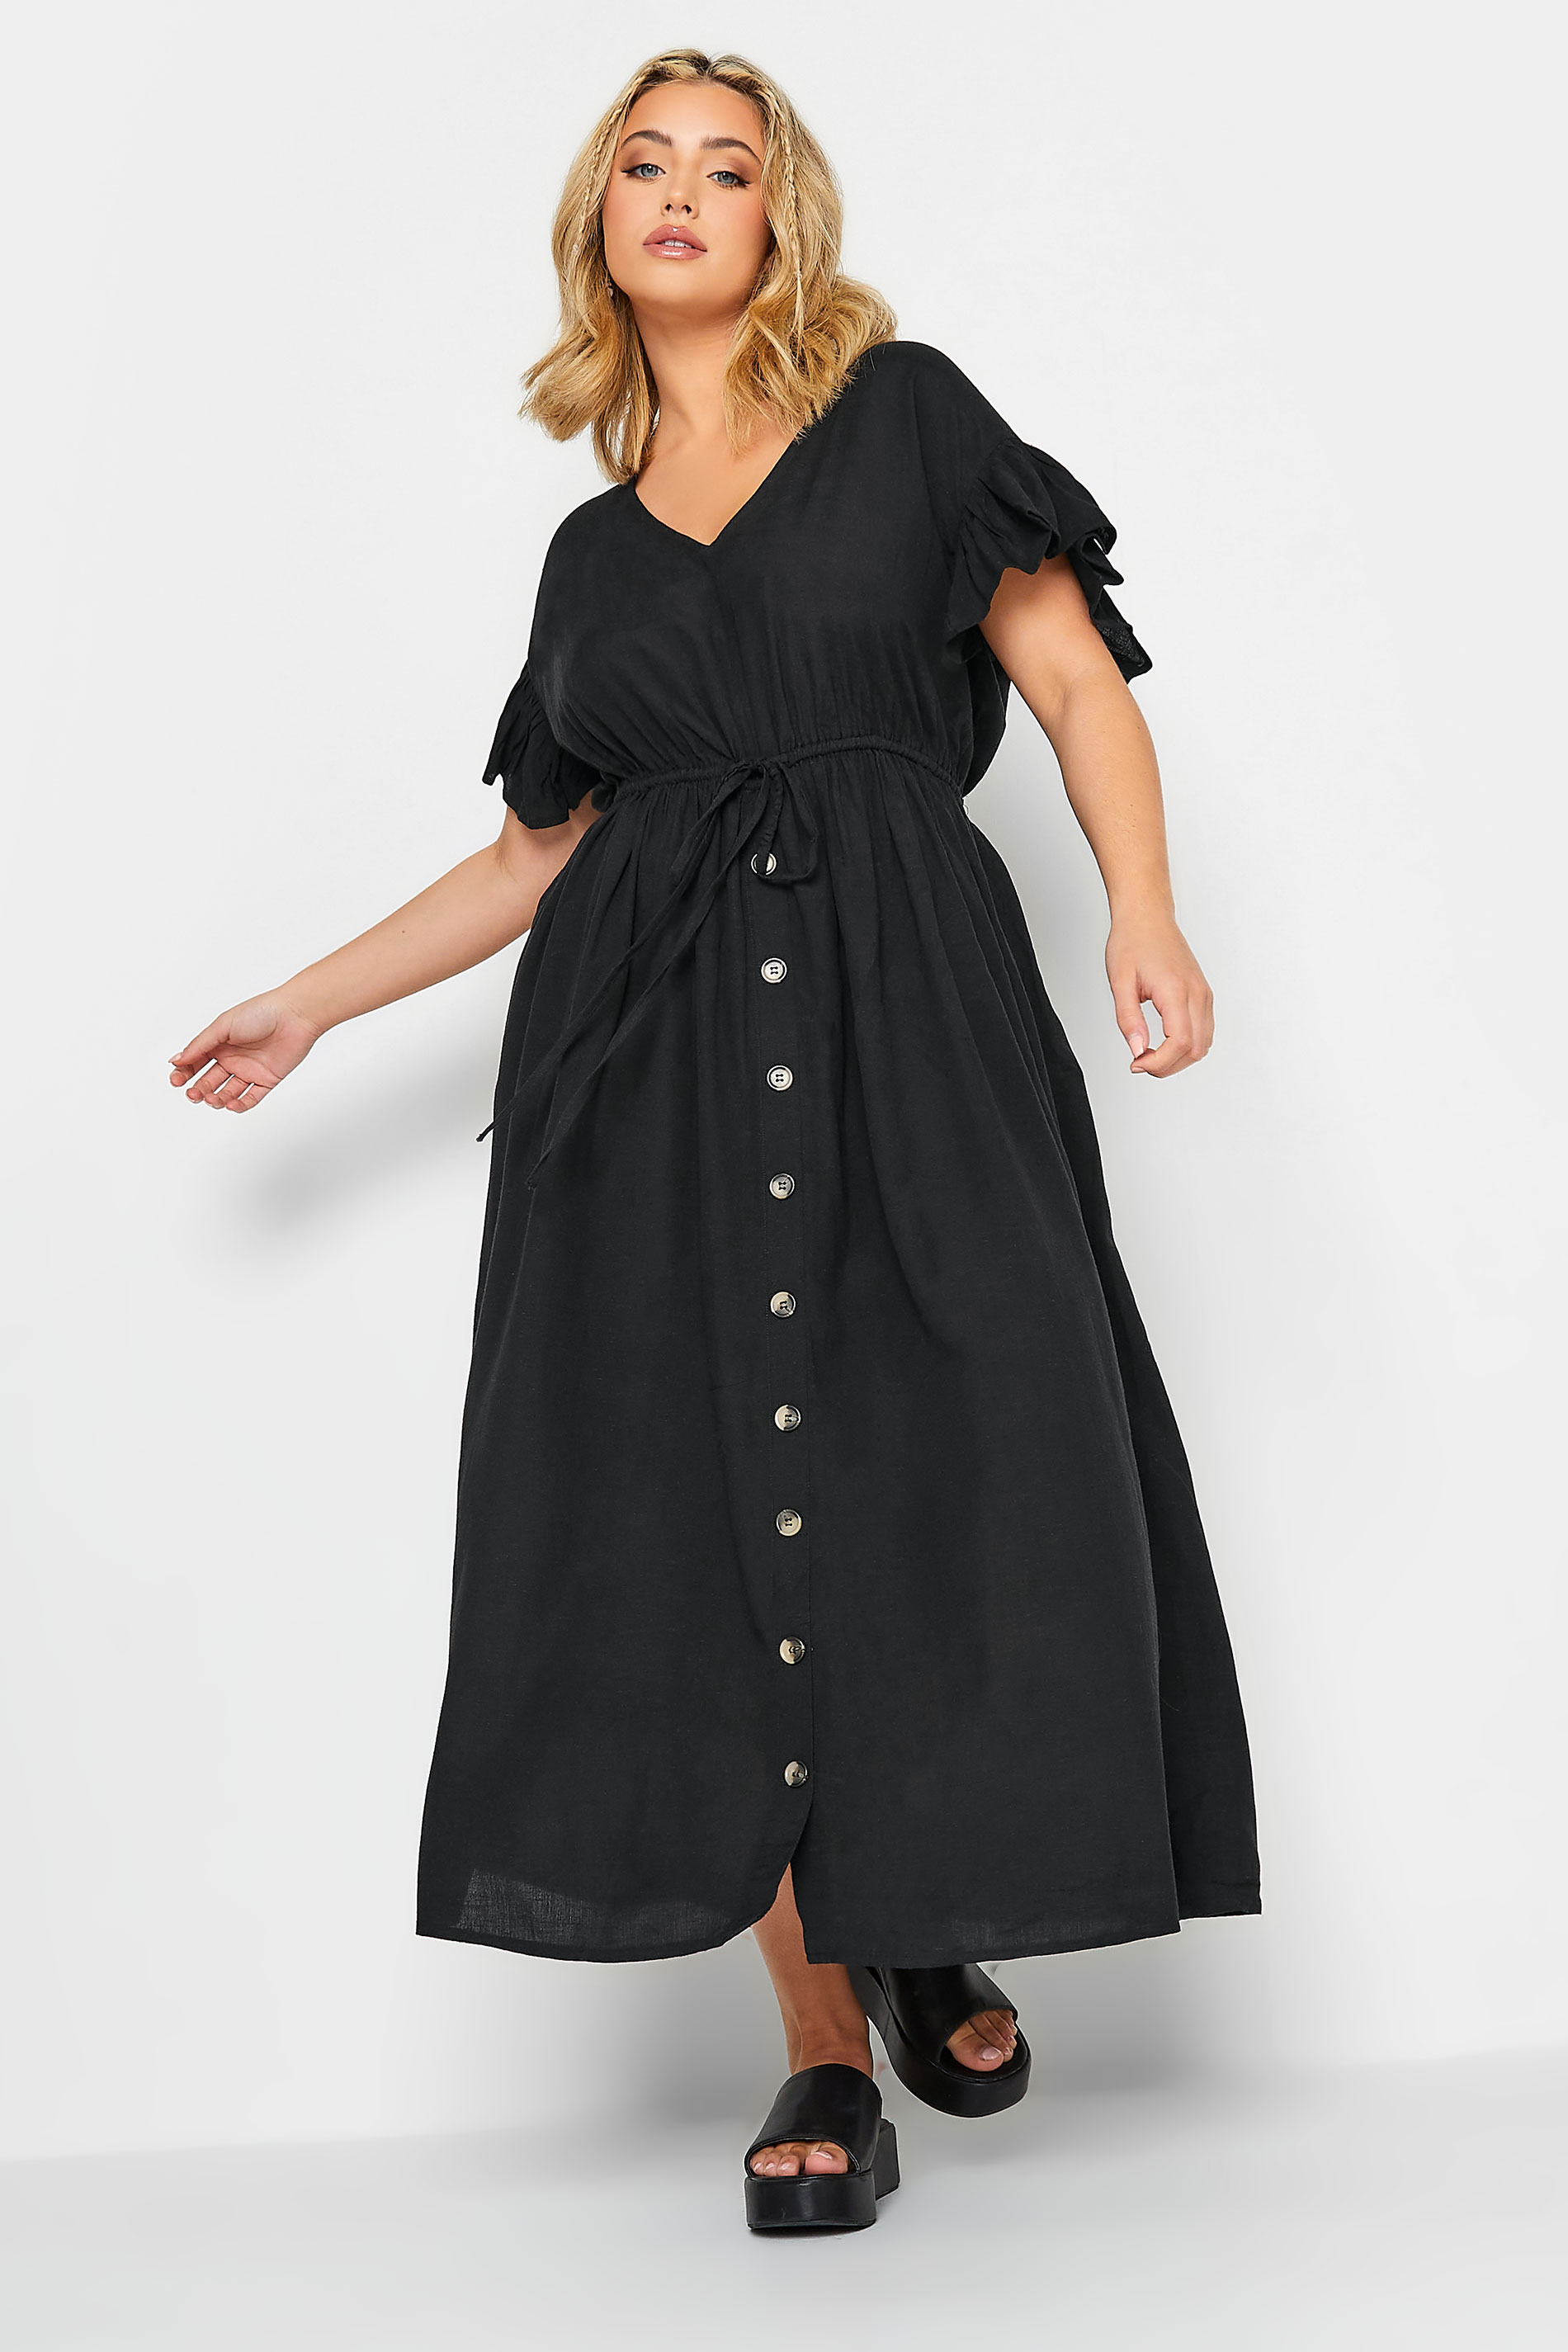 LIMITED COLLECTION Plus Size Black Frill Sleeve Cotton Maxi Dress | Yours Clothing 3